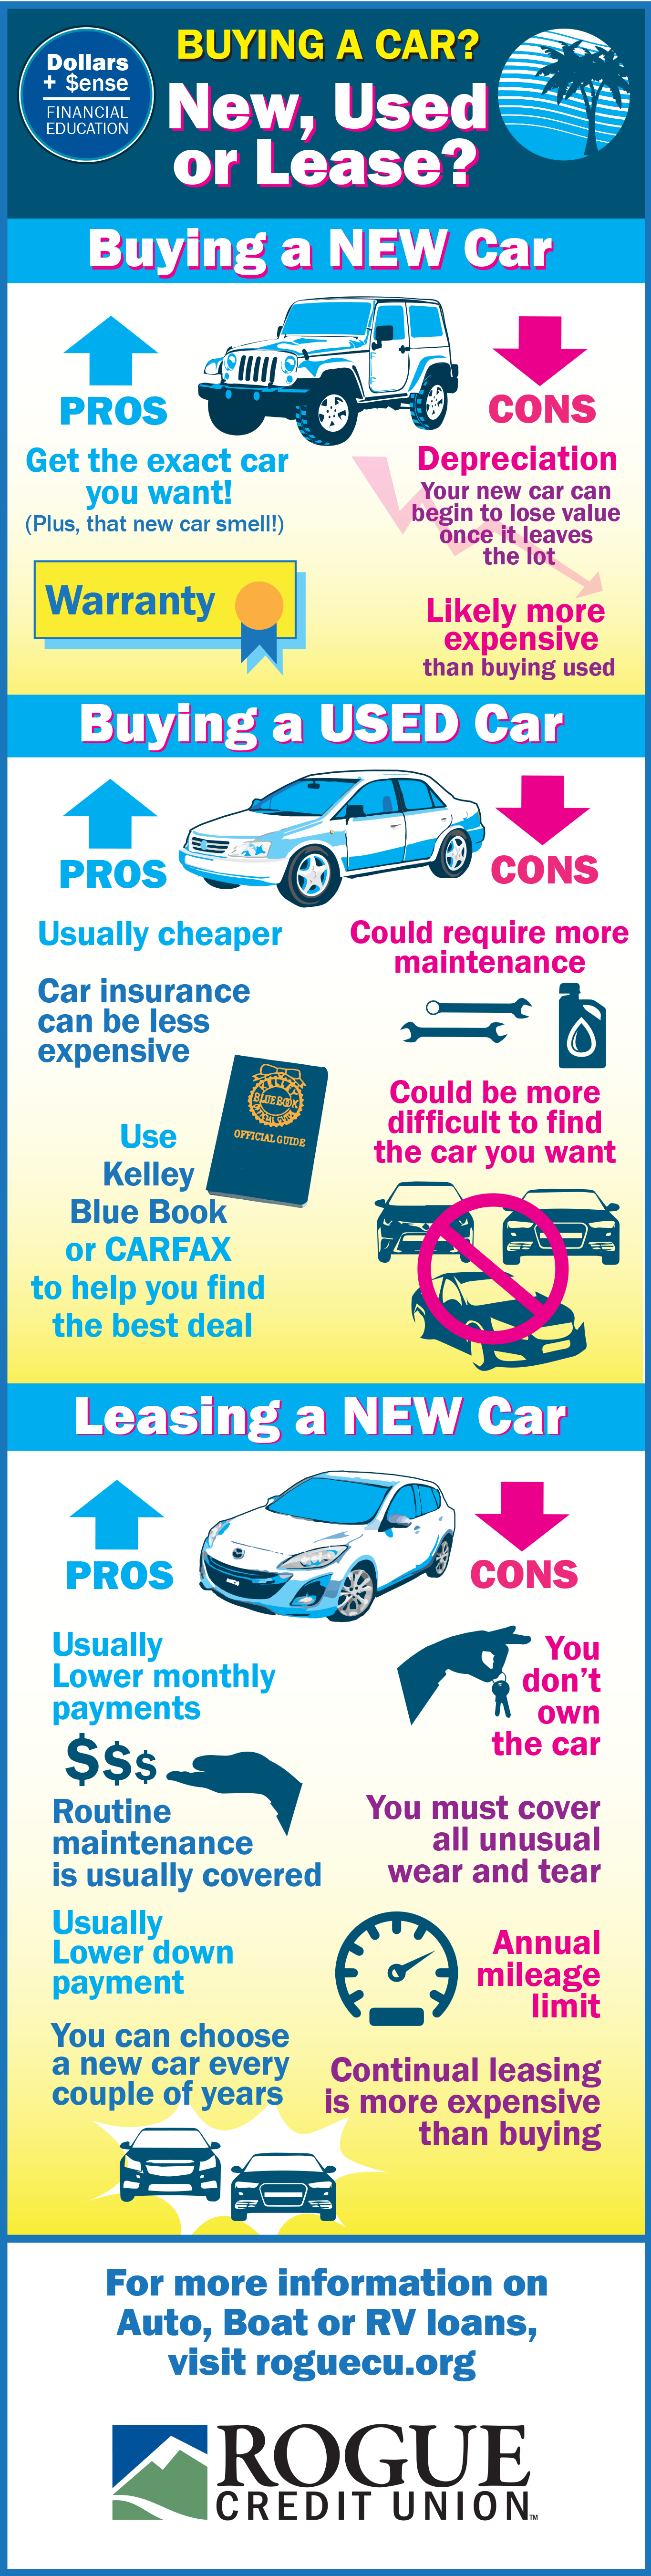 New Used or Lease Pros and Cons